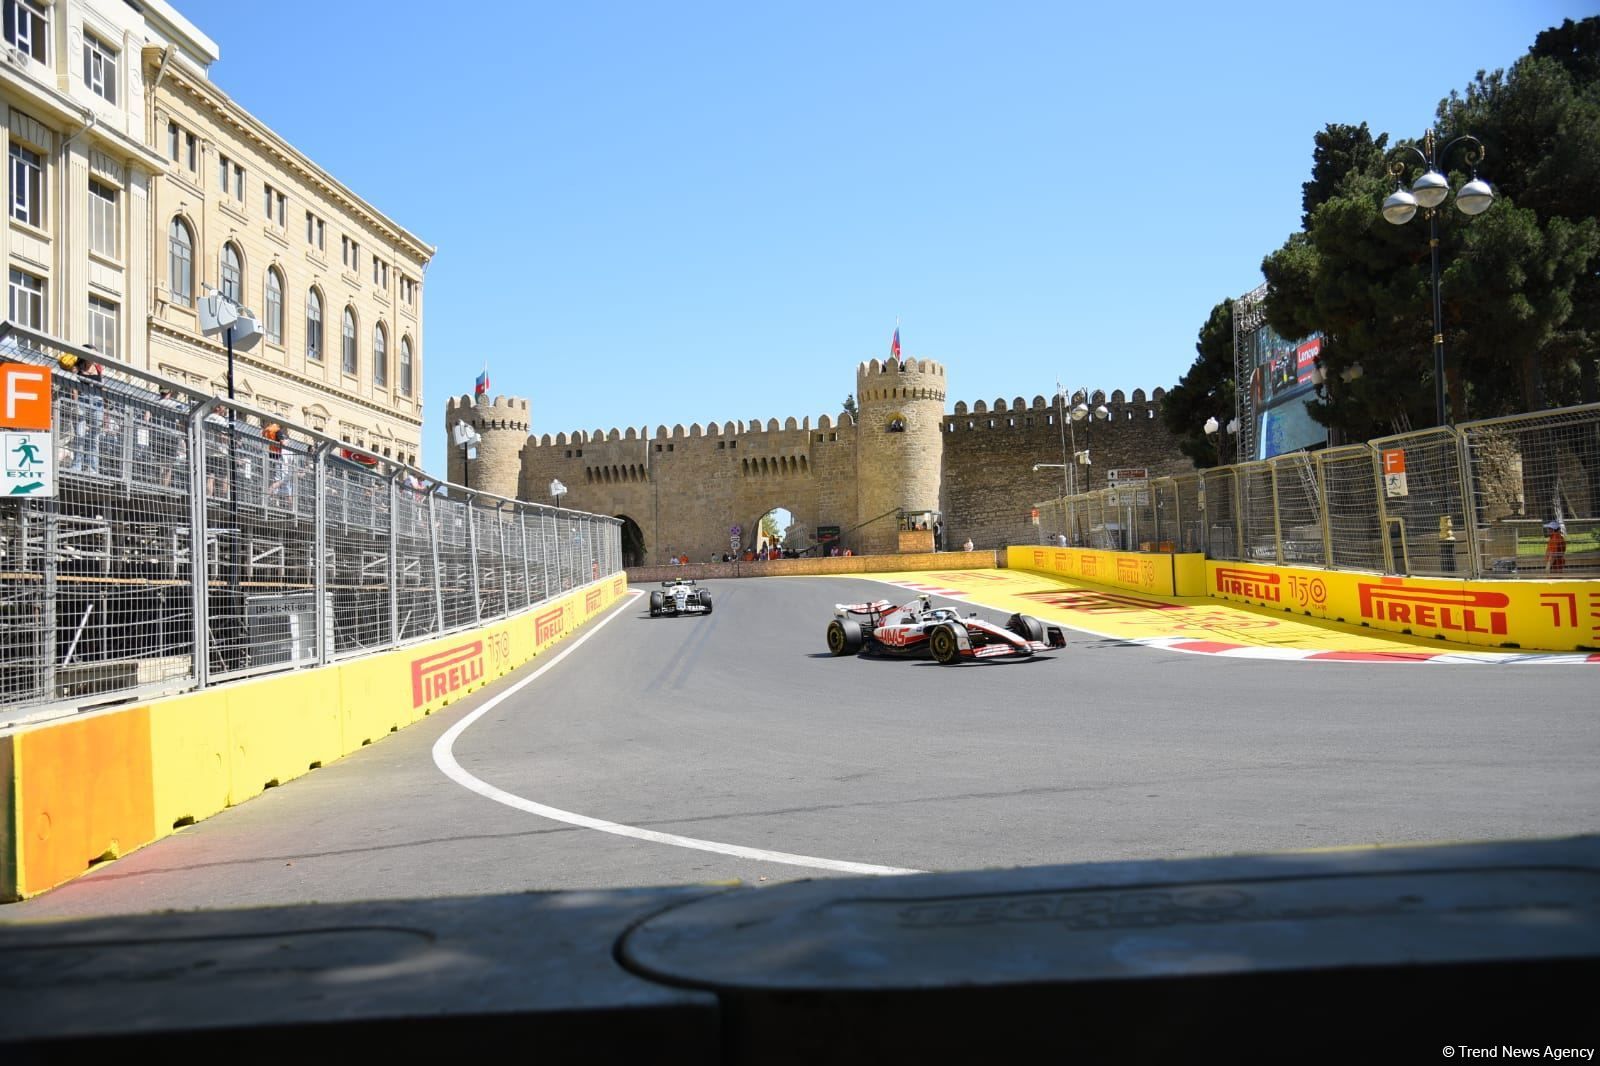 First practice session of F1 drivers underway in Baku [PHOTO]